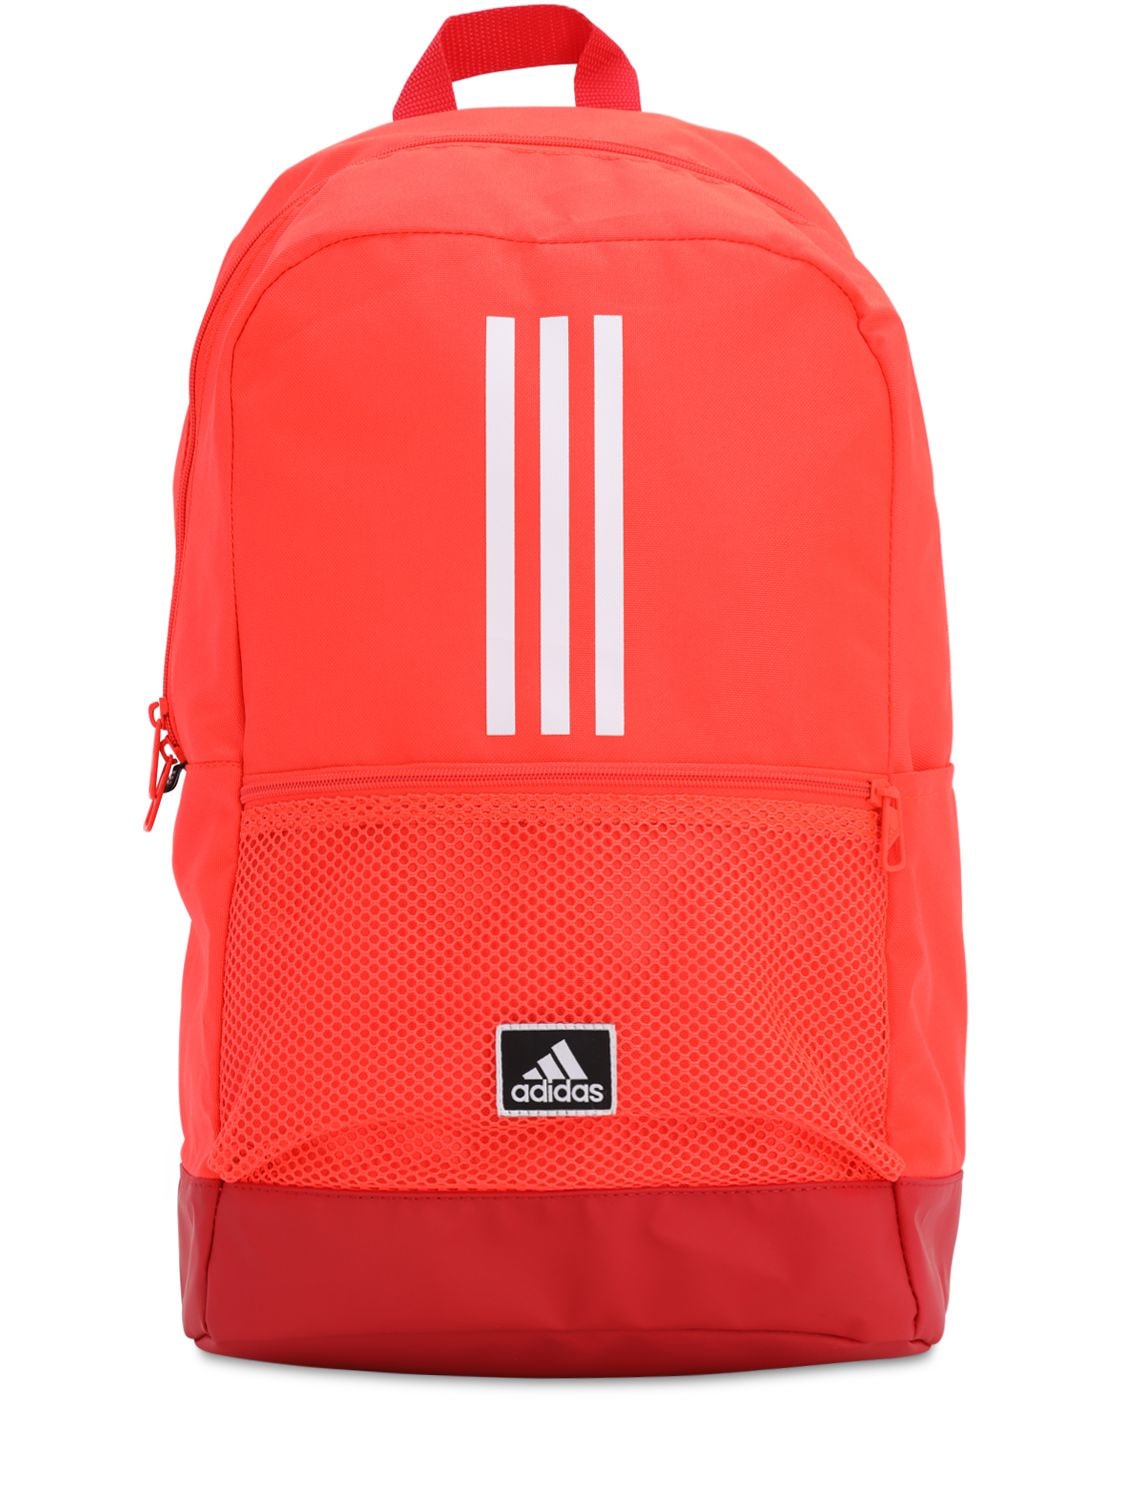 adidas classic red